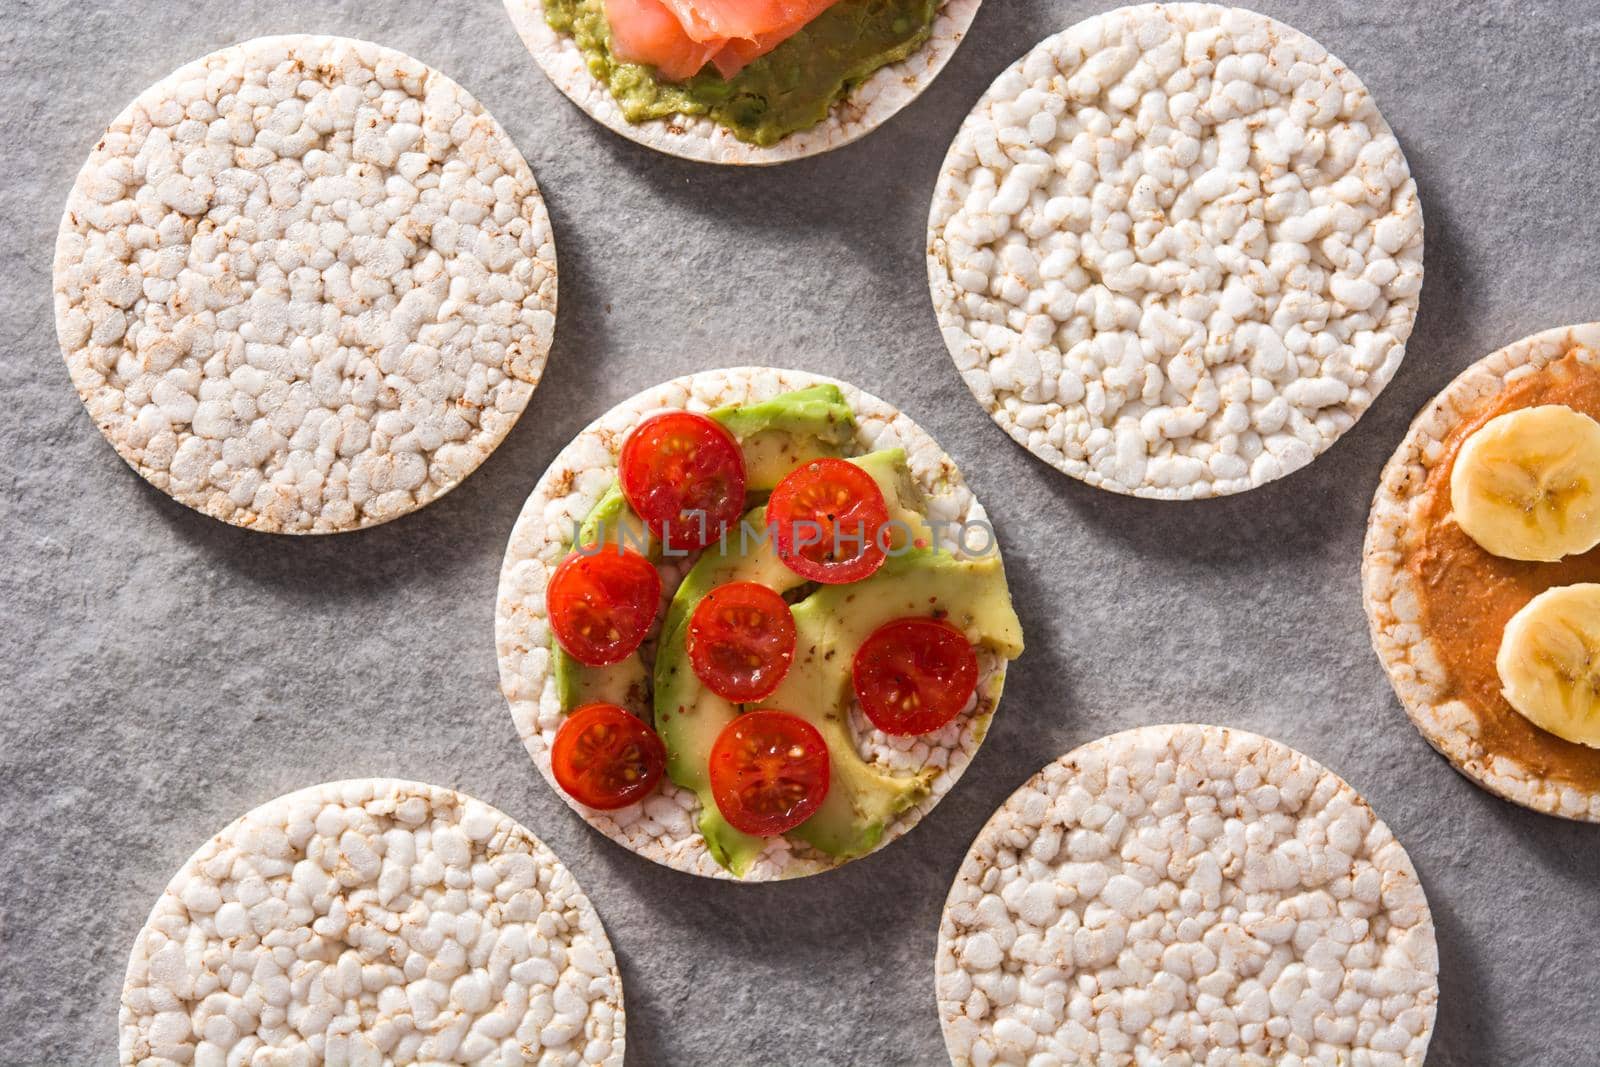 Puffed rice cakes with different ingredients by chandlervid85